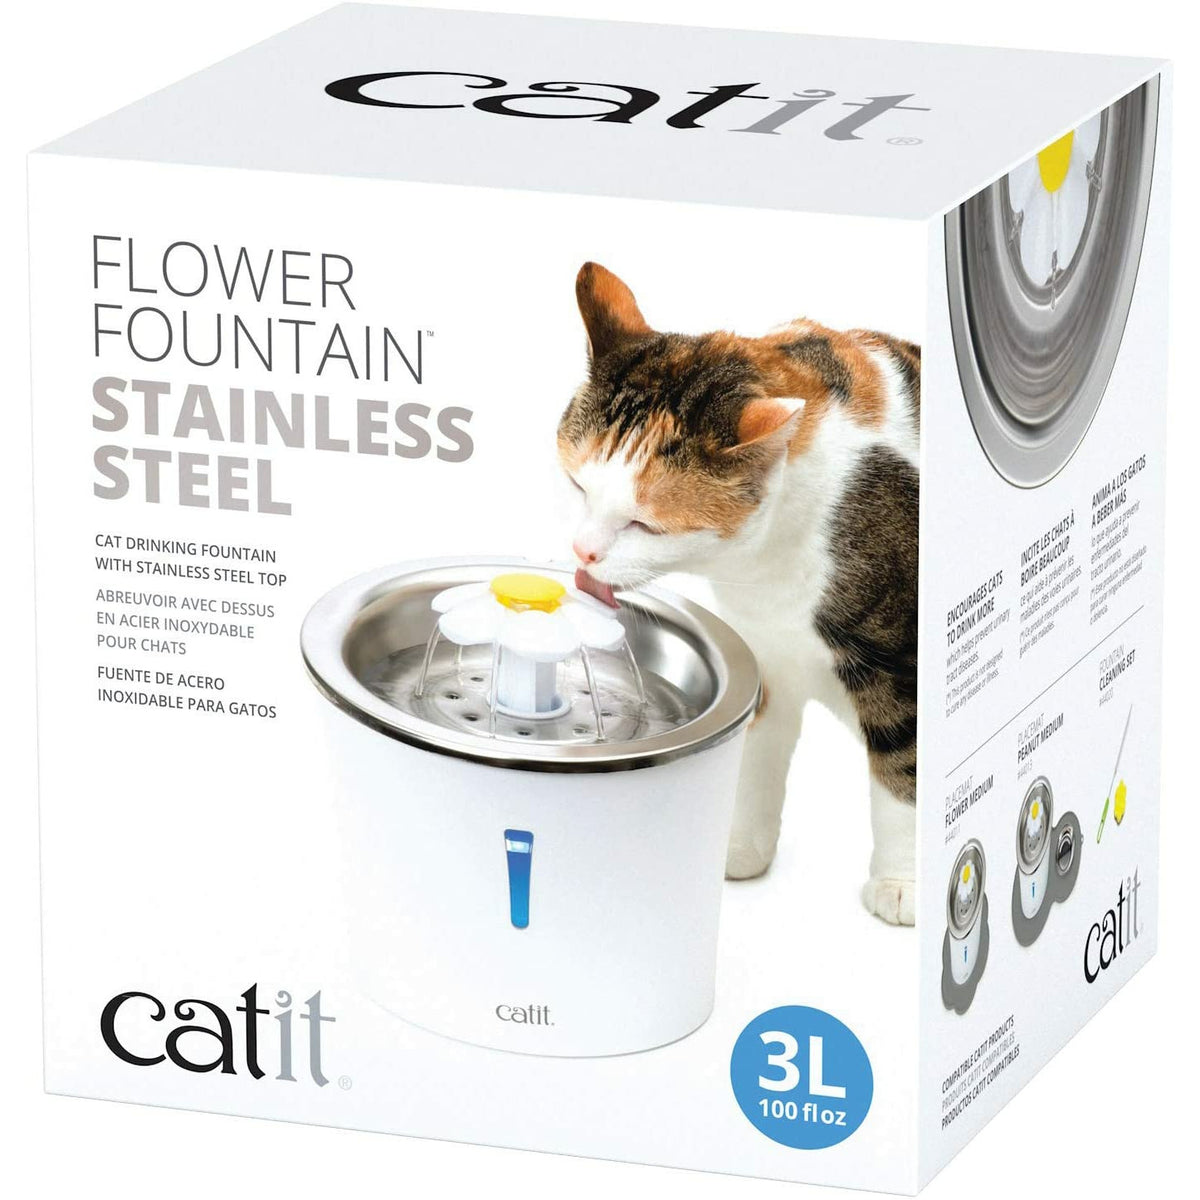 Catit Flower Fountain Stainless Steel Drinking Fountain for Cats